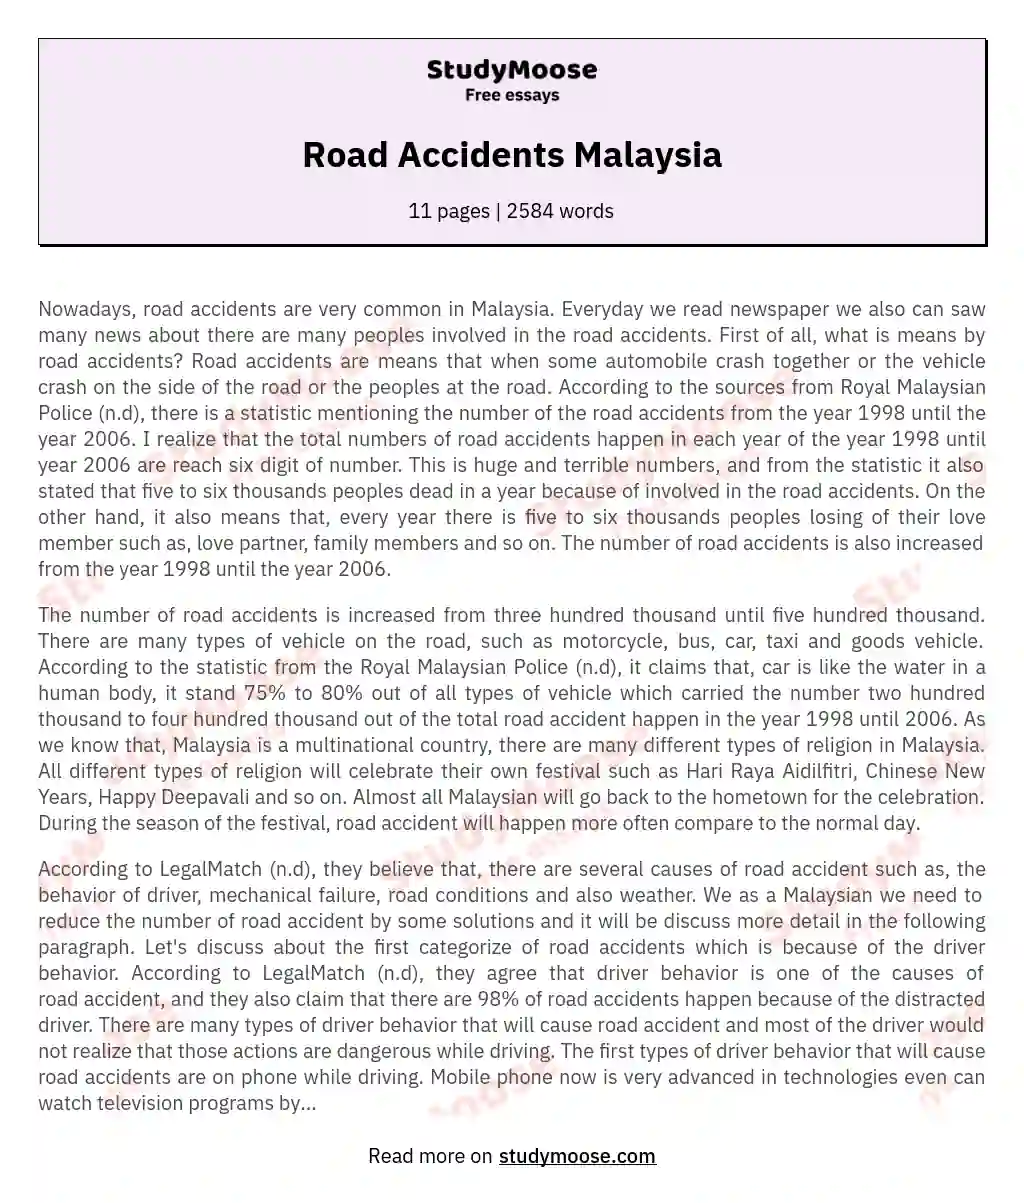 Road Accidents Malaysia essay